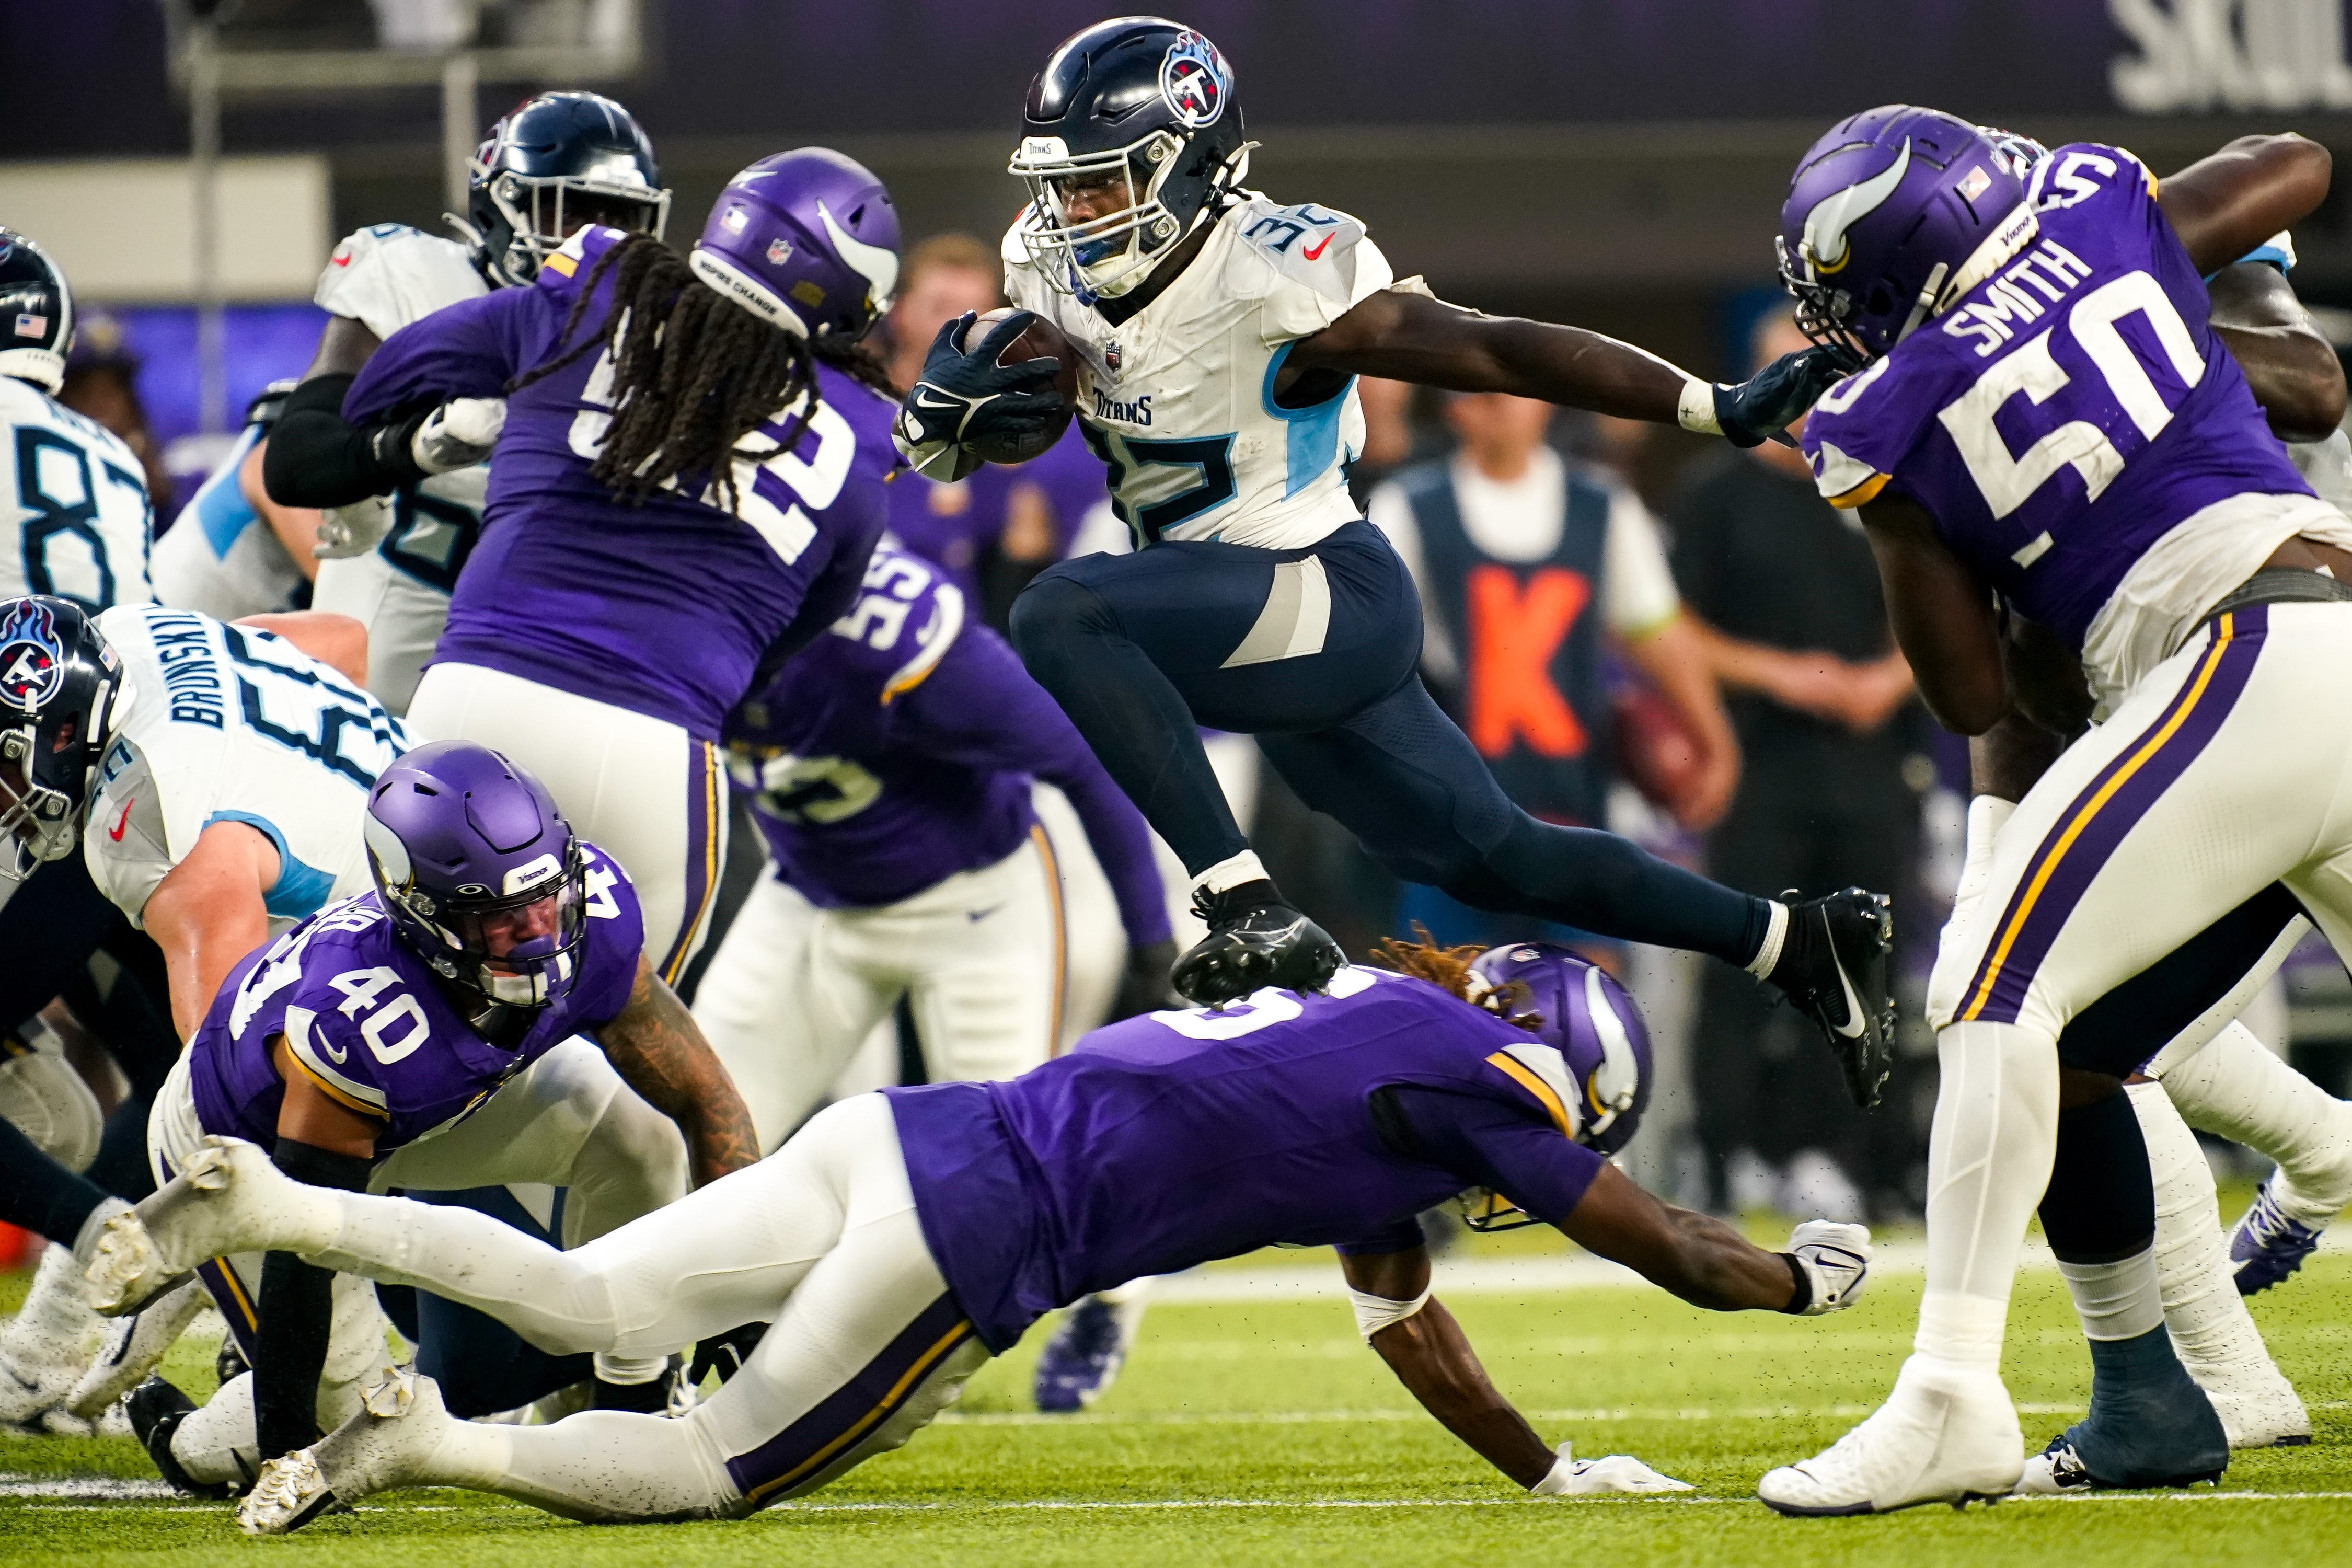 Tennessee Titans running back Tyjae Spears (32) leaps over the Minnesota Vikings defense to score a touchdown during the first quarter at U.S. Bank Stadium in Minneapolis, Minn., Saturday, Aug. 19, 2023.